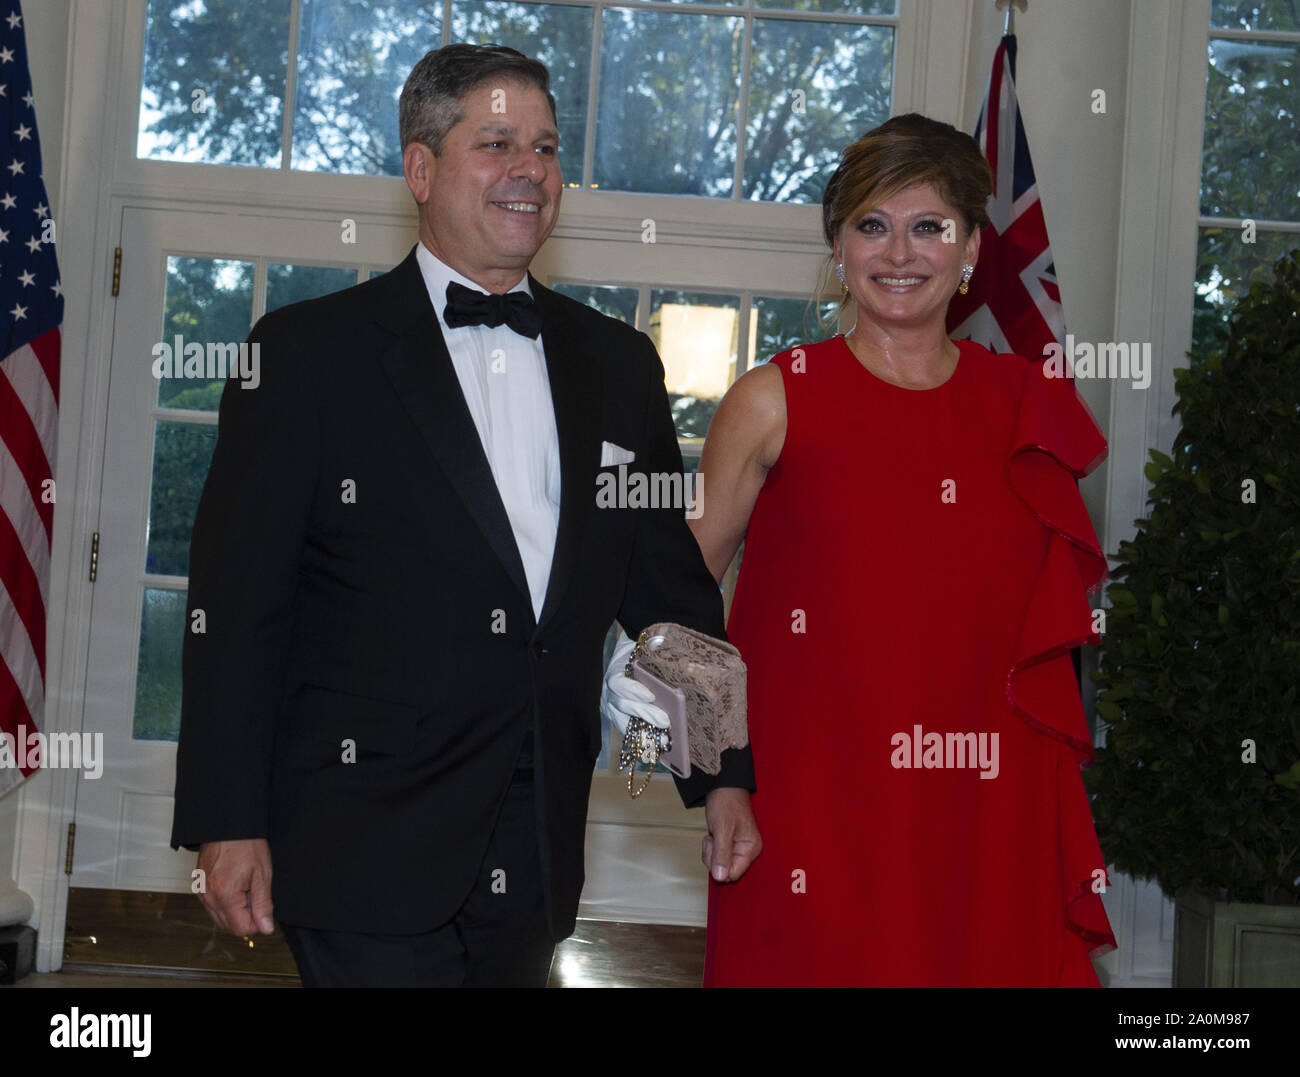 Washington, United States. 20th Sep, 2019. Maria Bartiromo and Jonathan Steinberg arrive for the State Dinne hosted by United States President Donald J. Trump and First lady Melania Trump in honor of Prime Minister Scott Morrison of Australia and his wife, Jenny Morrison, at the White House in Washington, DC on Friday, September 20, 2019. Photo by Ron Sachs/UPI Credit: UPI/Alamy Live News Stock Photo